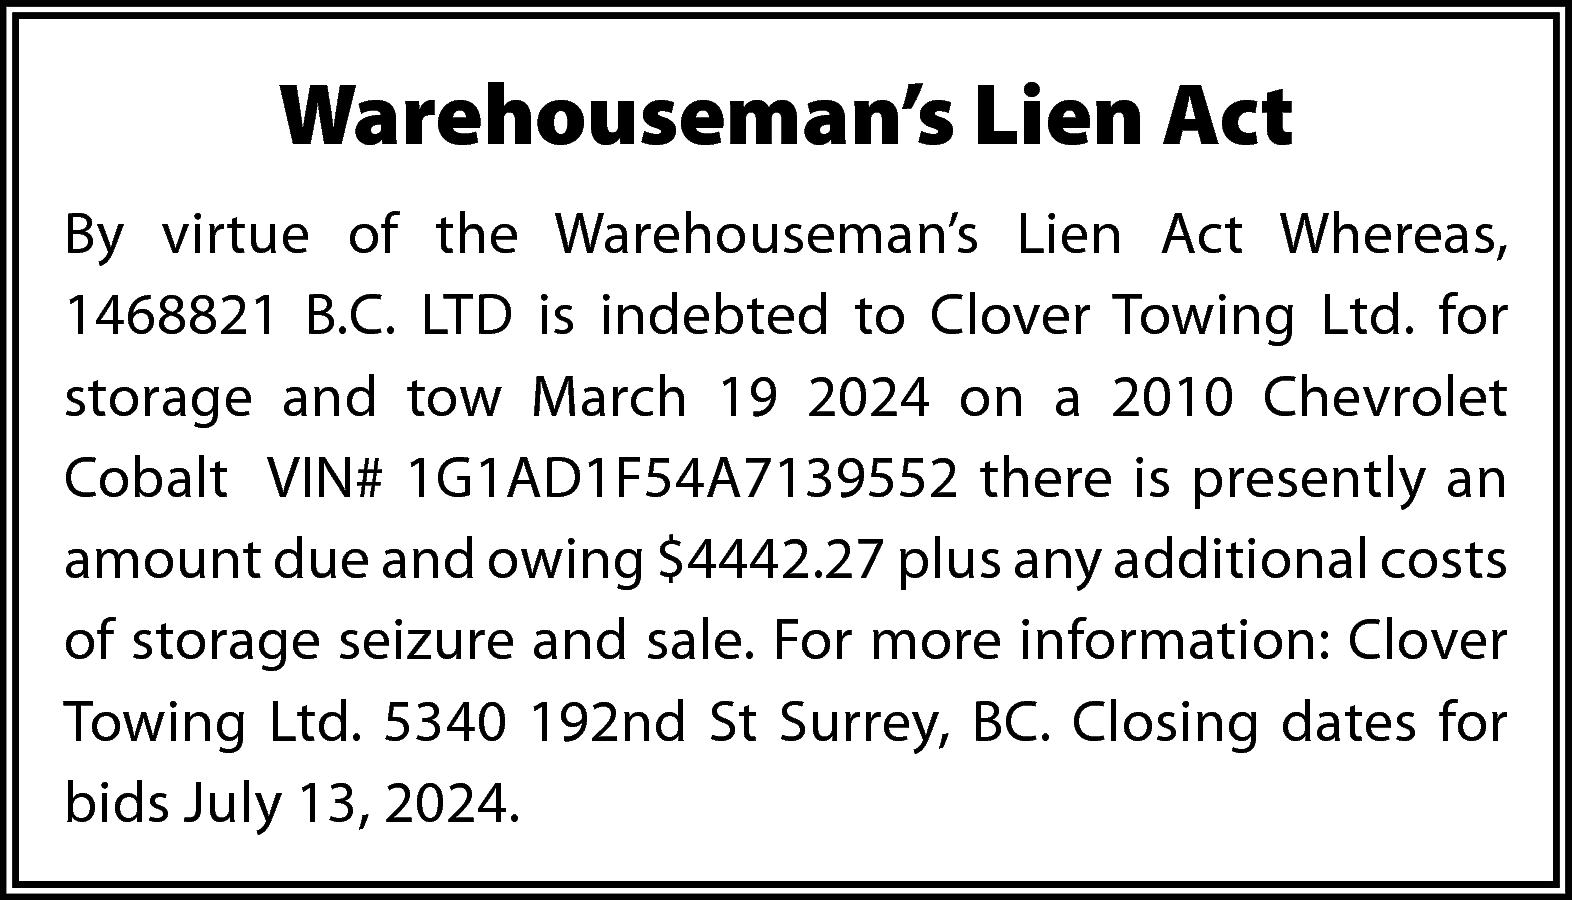 Warehouseman’s Lien Act <br>By virtue  Warehouseman’s Lien Act  By virtue of the Warehouseman’s Lien Act Whereas,  1468821 B.C. LTD is indebted to Clover Towing Ltd. for  storage and tow March 19 2024 on a 2010 Chevrolet  Cobalt VIN# 1G1AD1F54A7139552 there is presently an  amount due and owing $4442.27 plus any additional costs  of storage seizure and sale. For more information: Clover  Towing Ltd. 5340 192nd St Surrey, BC. Closing dates for  bids July 13, 2024.    